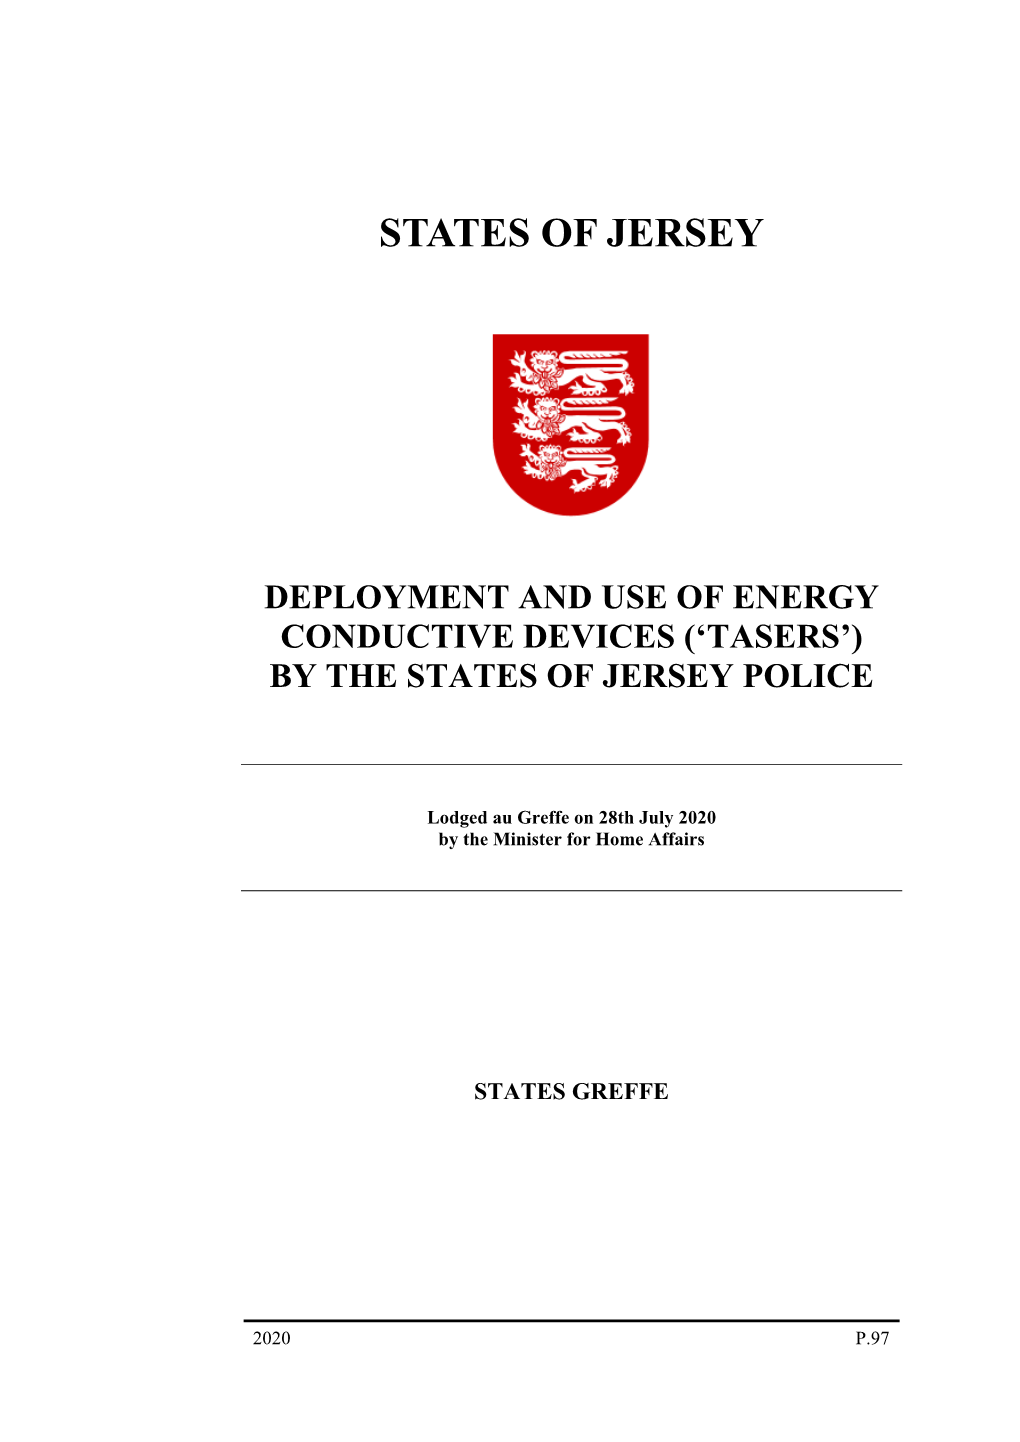 Deployment and Use of Energy Conductive Devices ('Tasers') by the States of Jersey Police